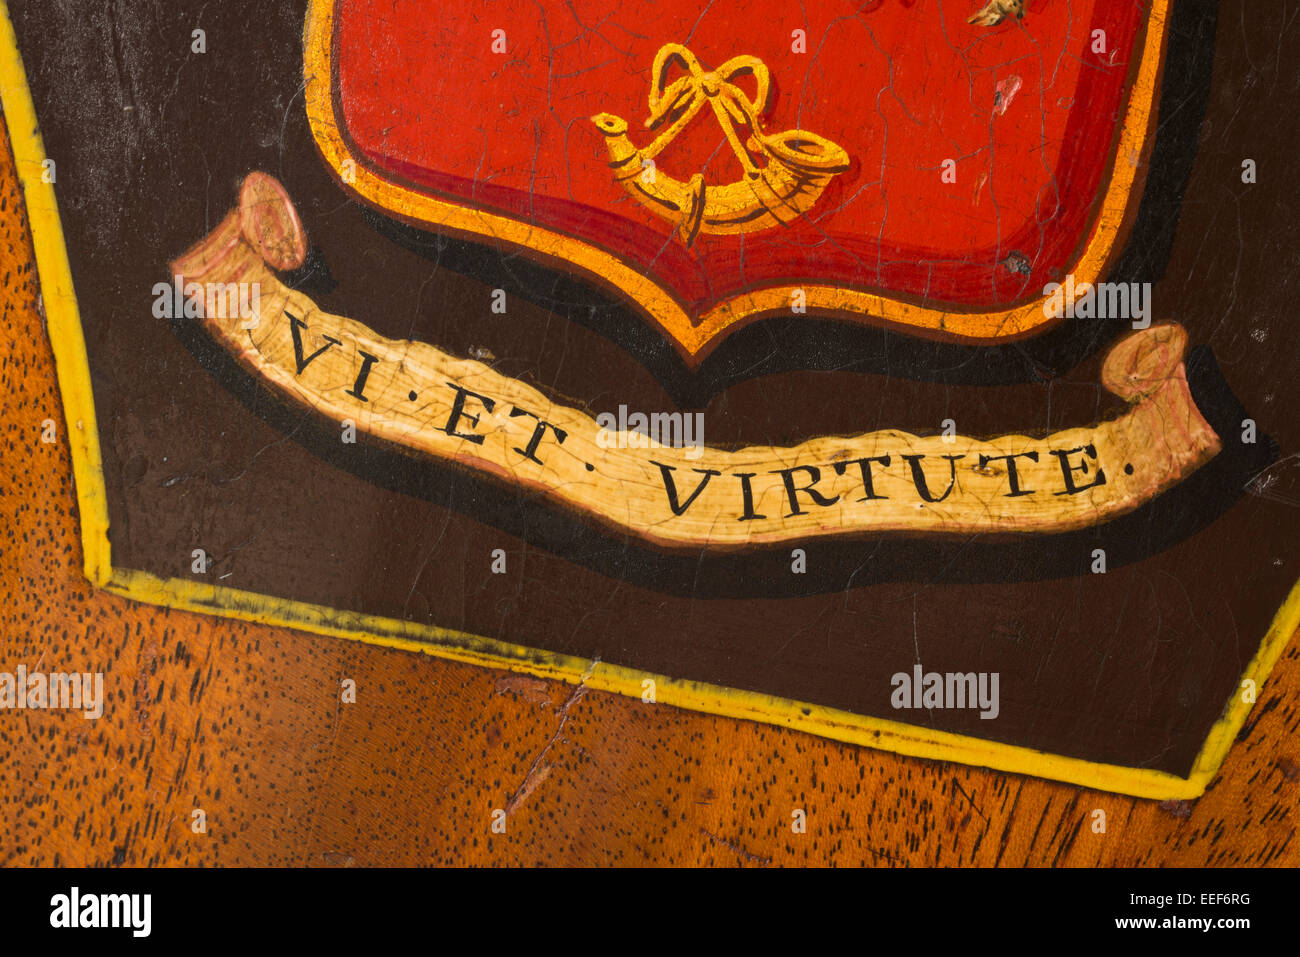 Vi et Virtute, family motto in Latin. Meaning, By Strength and Valour. Stock Photo